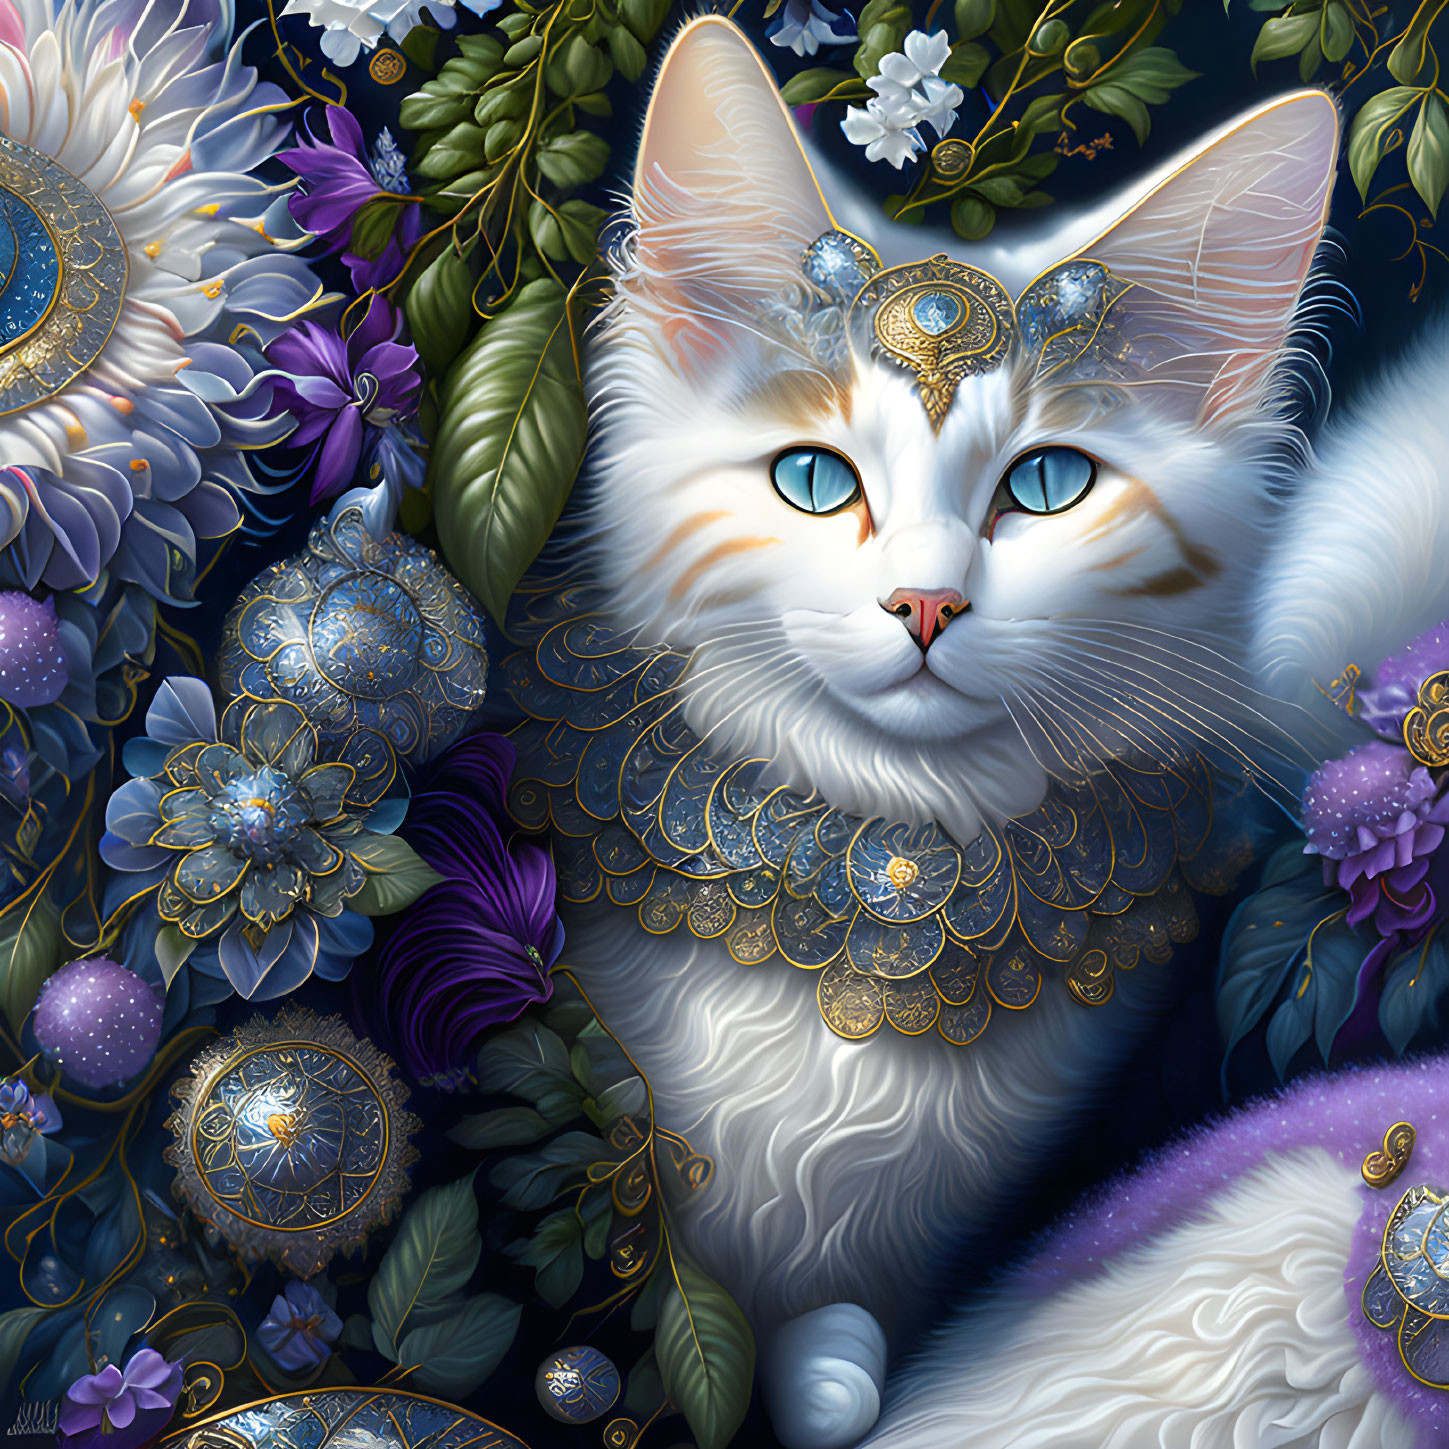 Regal white cat digital art with blue eyes and golden jewelry among colorful flowers